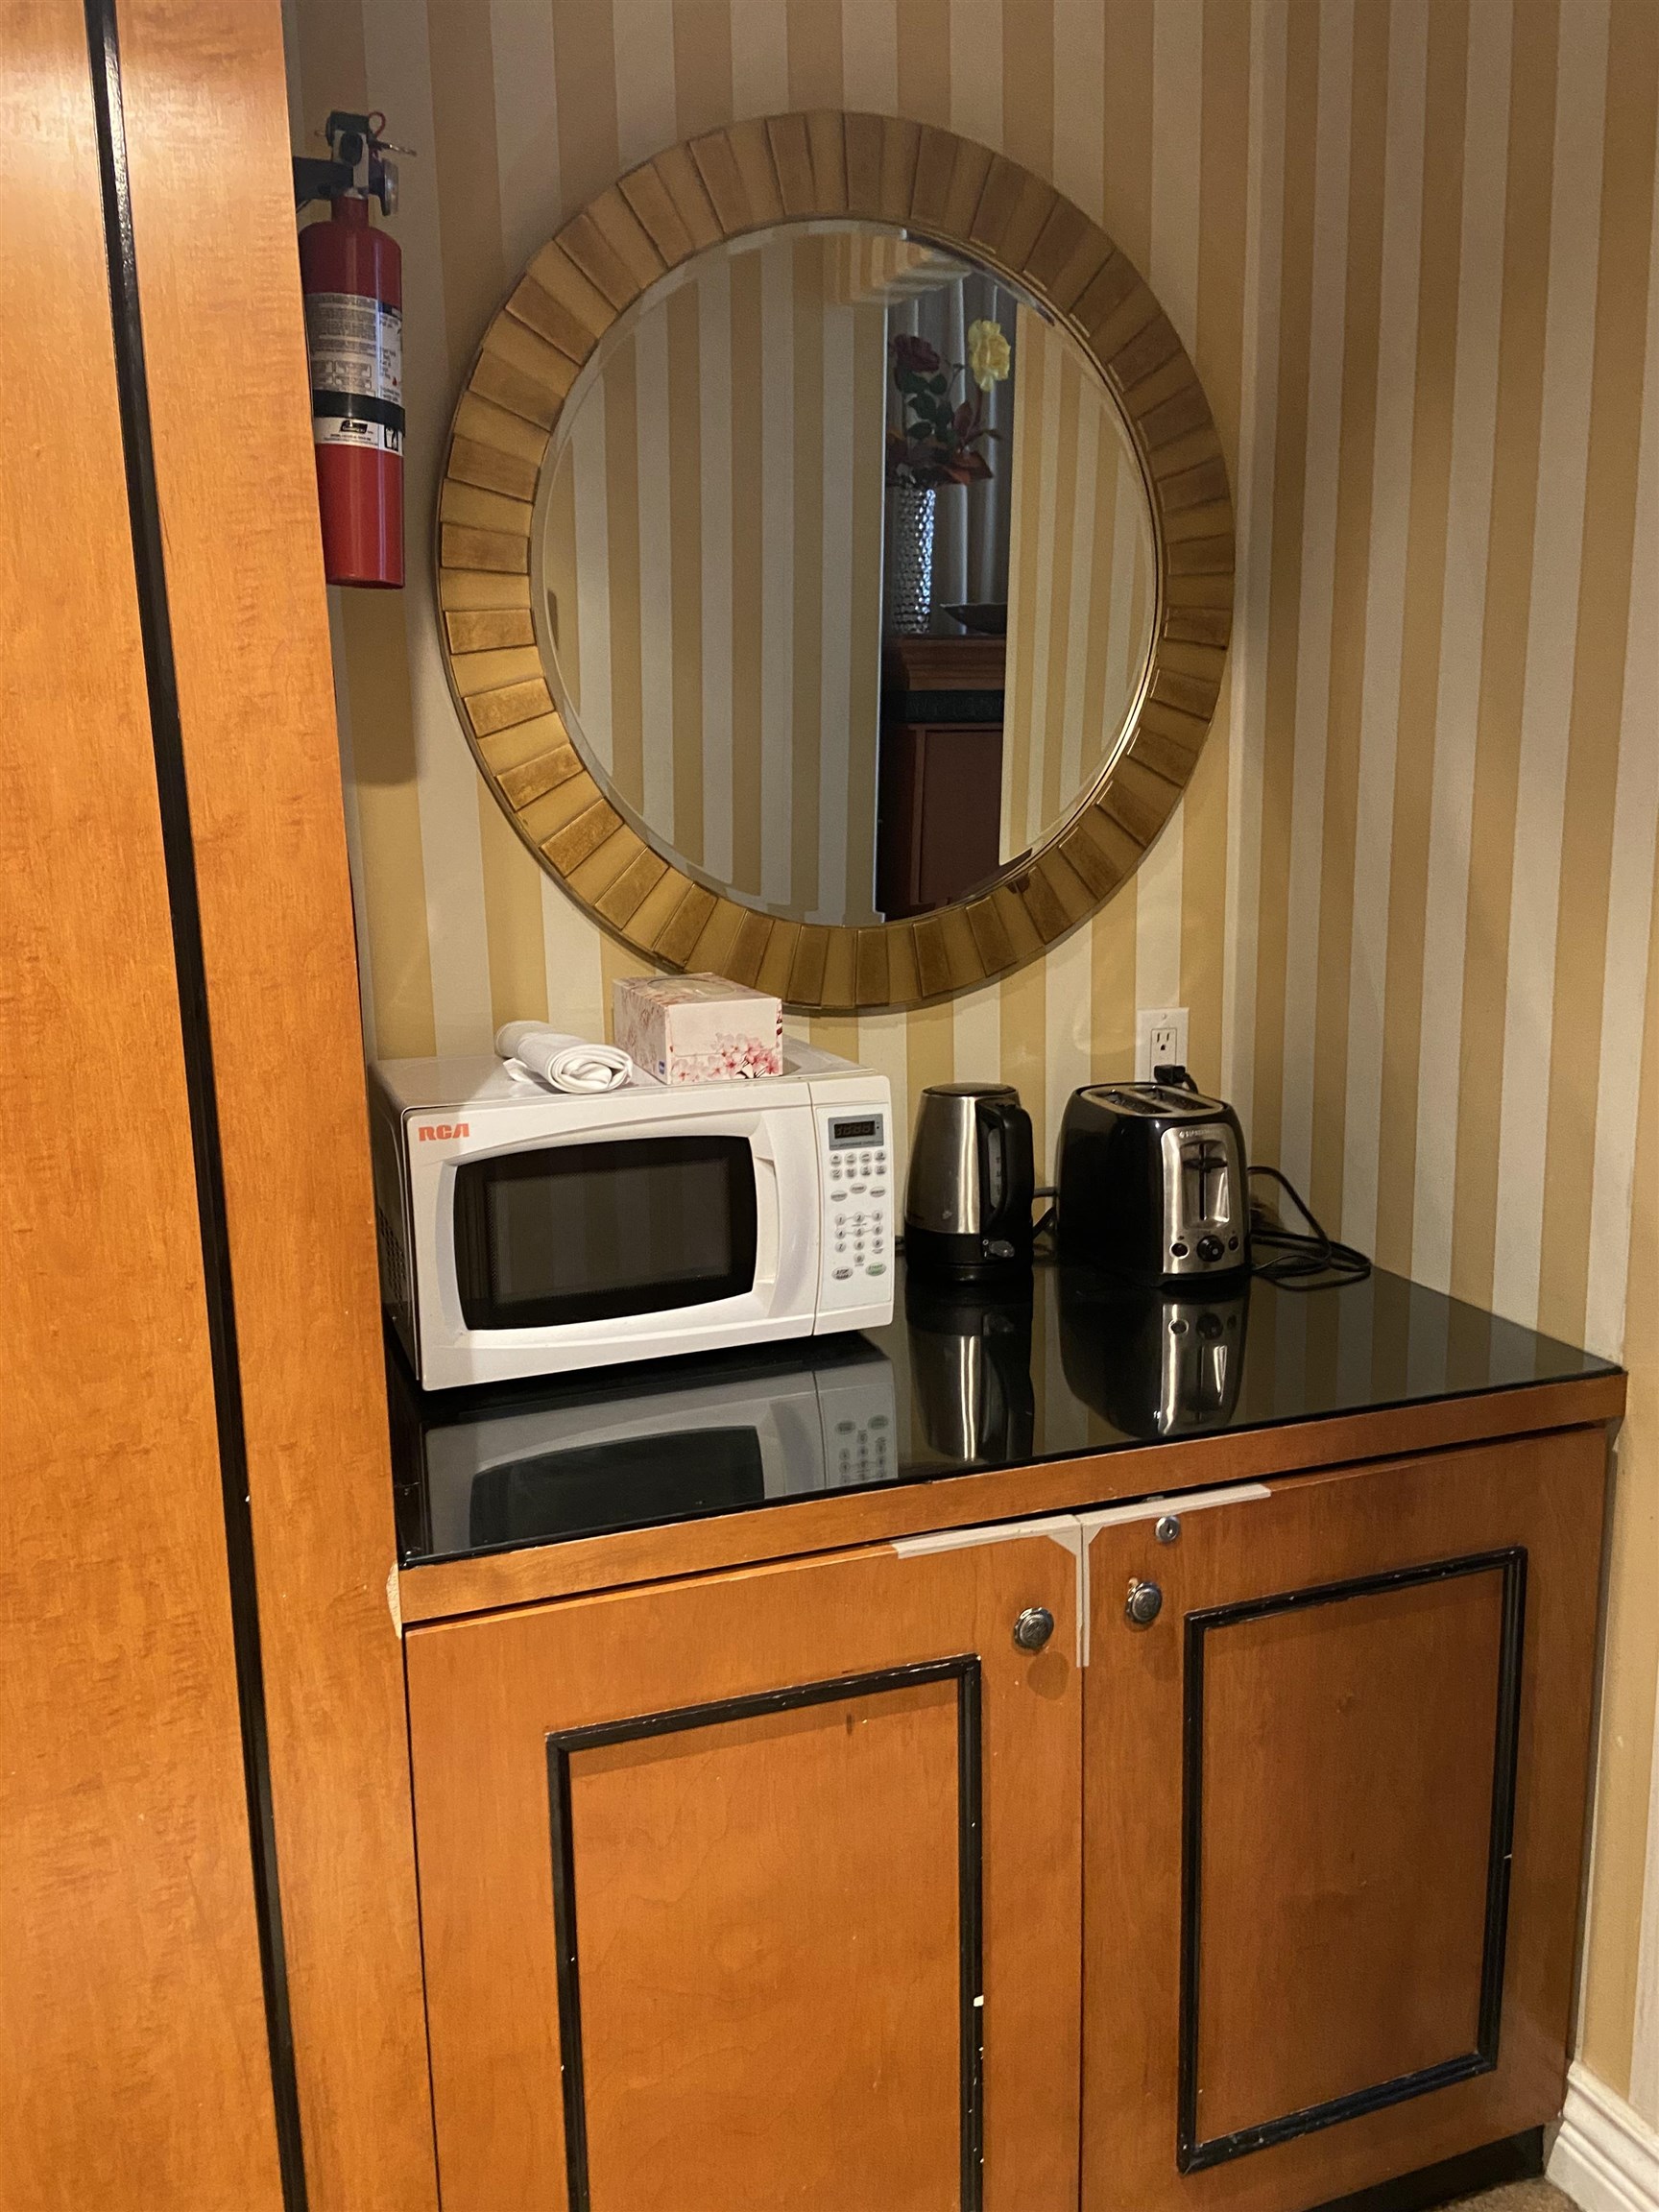 Cabinet with microwave, kettle, toaster and bar fridge.